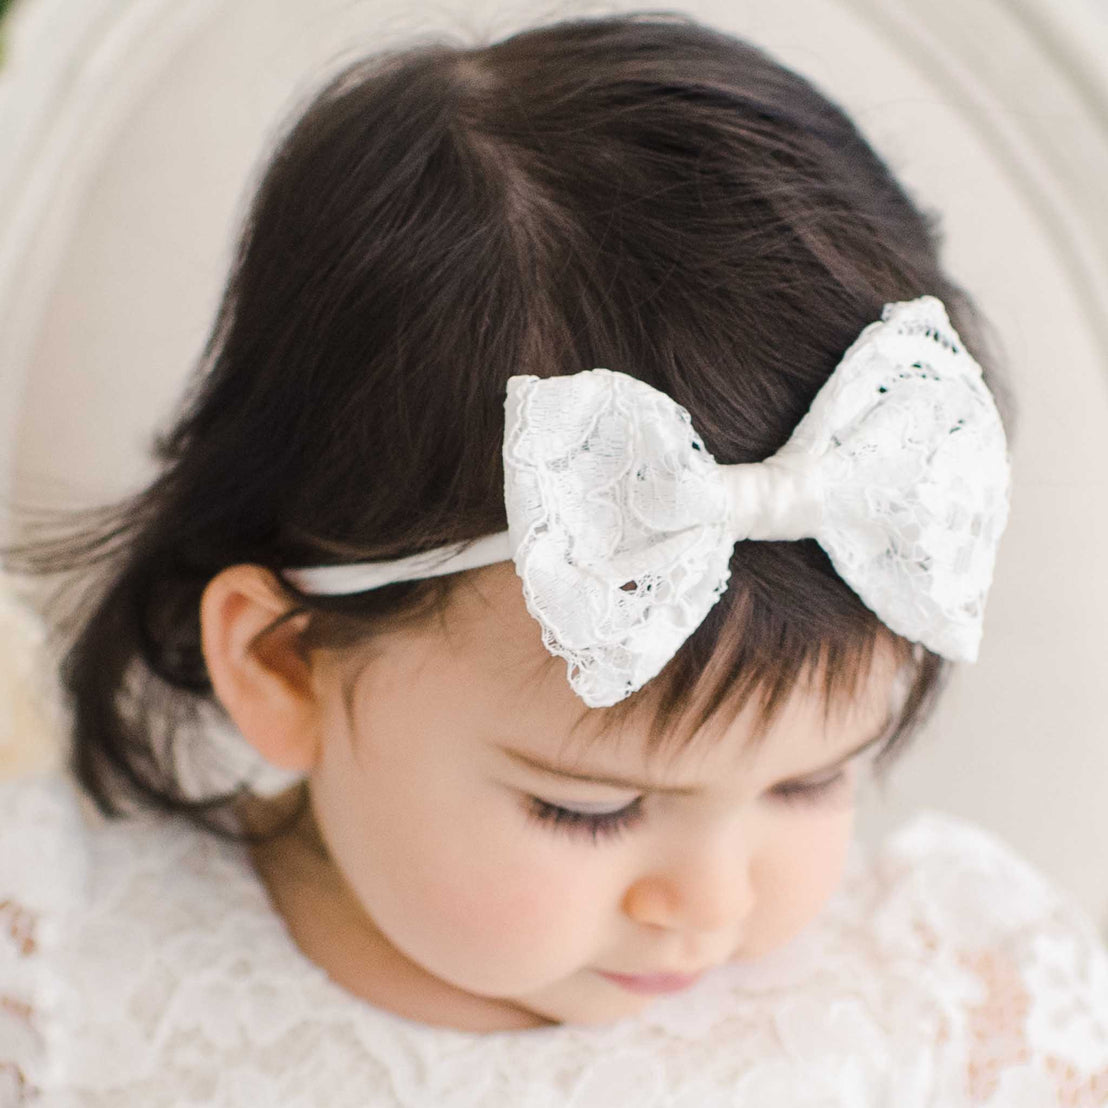 A close-up photograph of a baby with dark hair wearing a large, Rose Bow Headband, looking down thoughtfully, dressed in an upscale, vintage outfit.